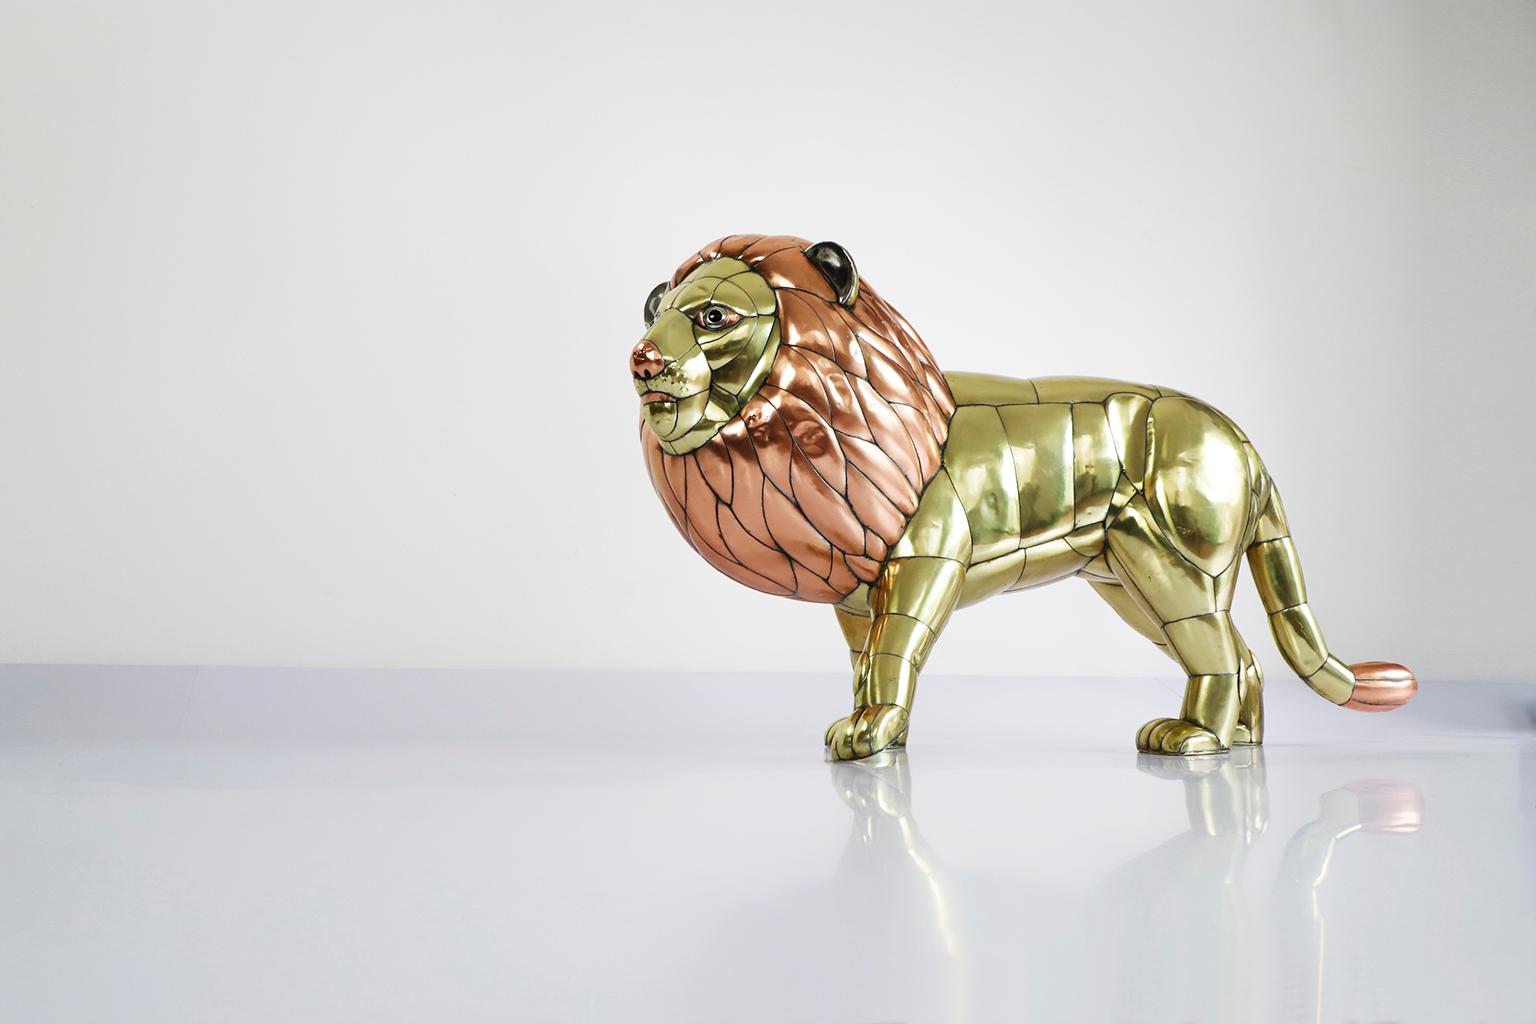 Circa 1970, we offer this Lion Sculpture by Sergio Bustamante, made in Bronze and copper elements, cut bent and assembled.

Sergio Bustamante is a Mexican Artist and sculptor. He began with paintings and papier mache figures, inaugurating the